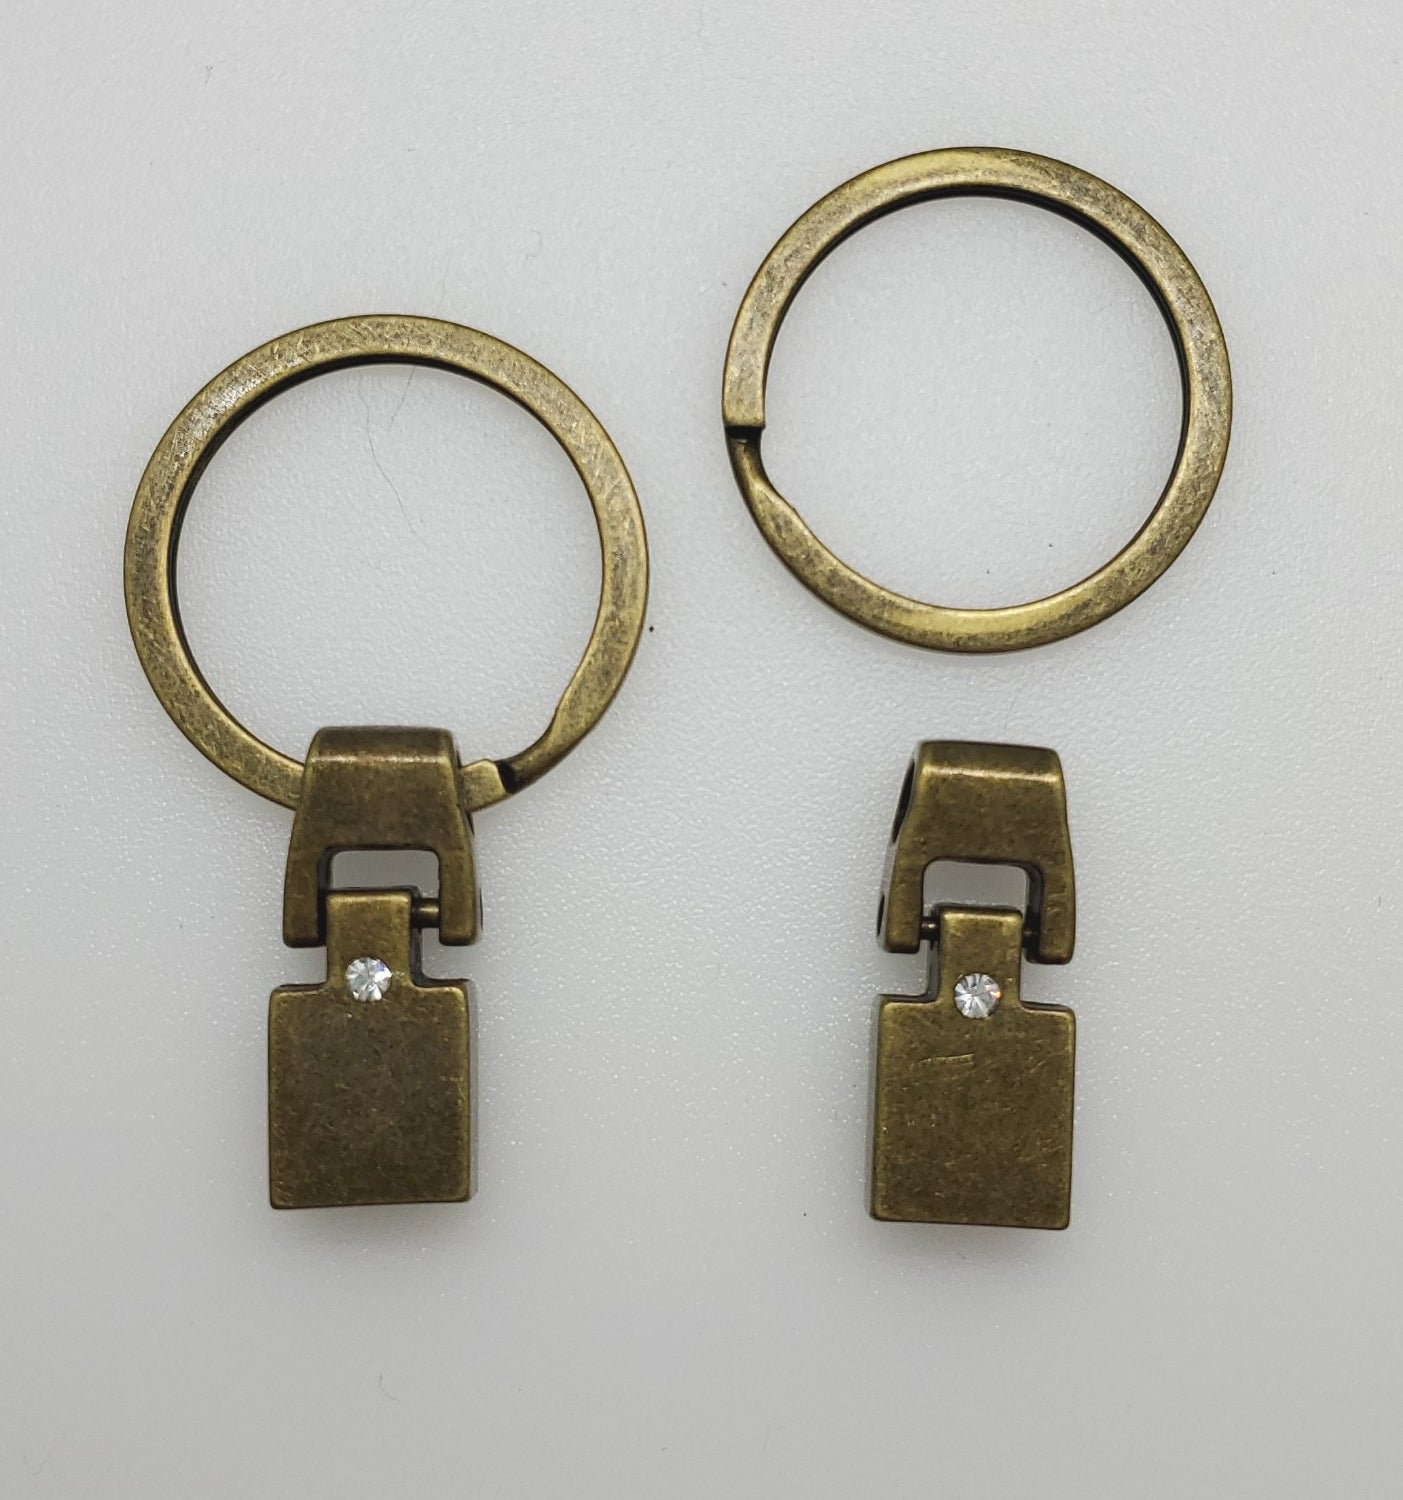 Key Fob Hardware 10 Sets ANTIQUE BRASS 1.25 INCH 32 Mm Key Fob Clamps With  Rings Wristlet/key Chains 5% off Orders Over 50 Dollars 